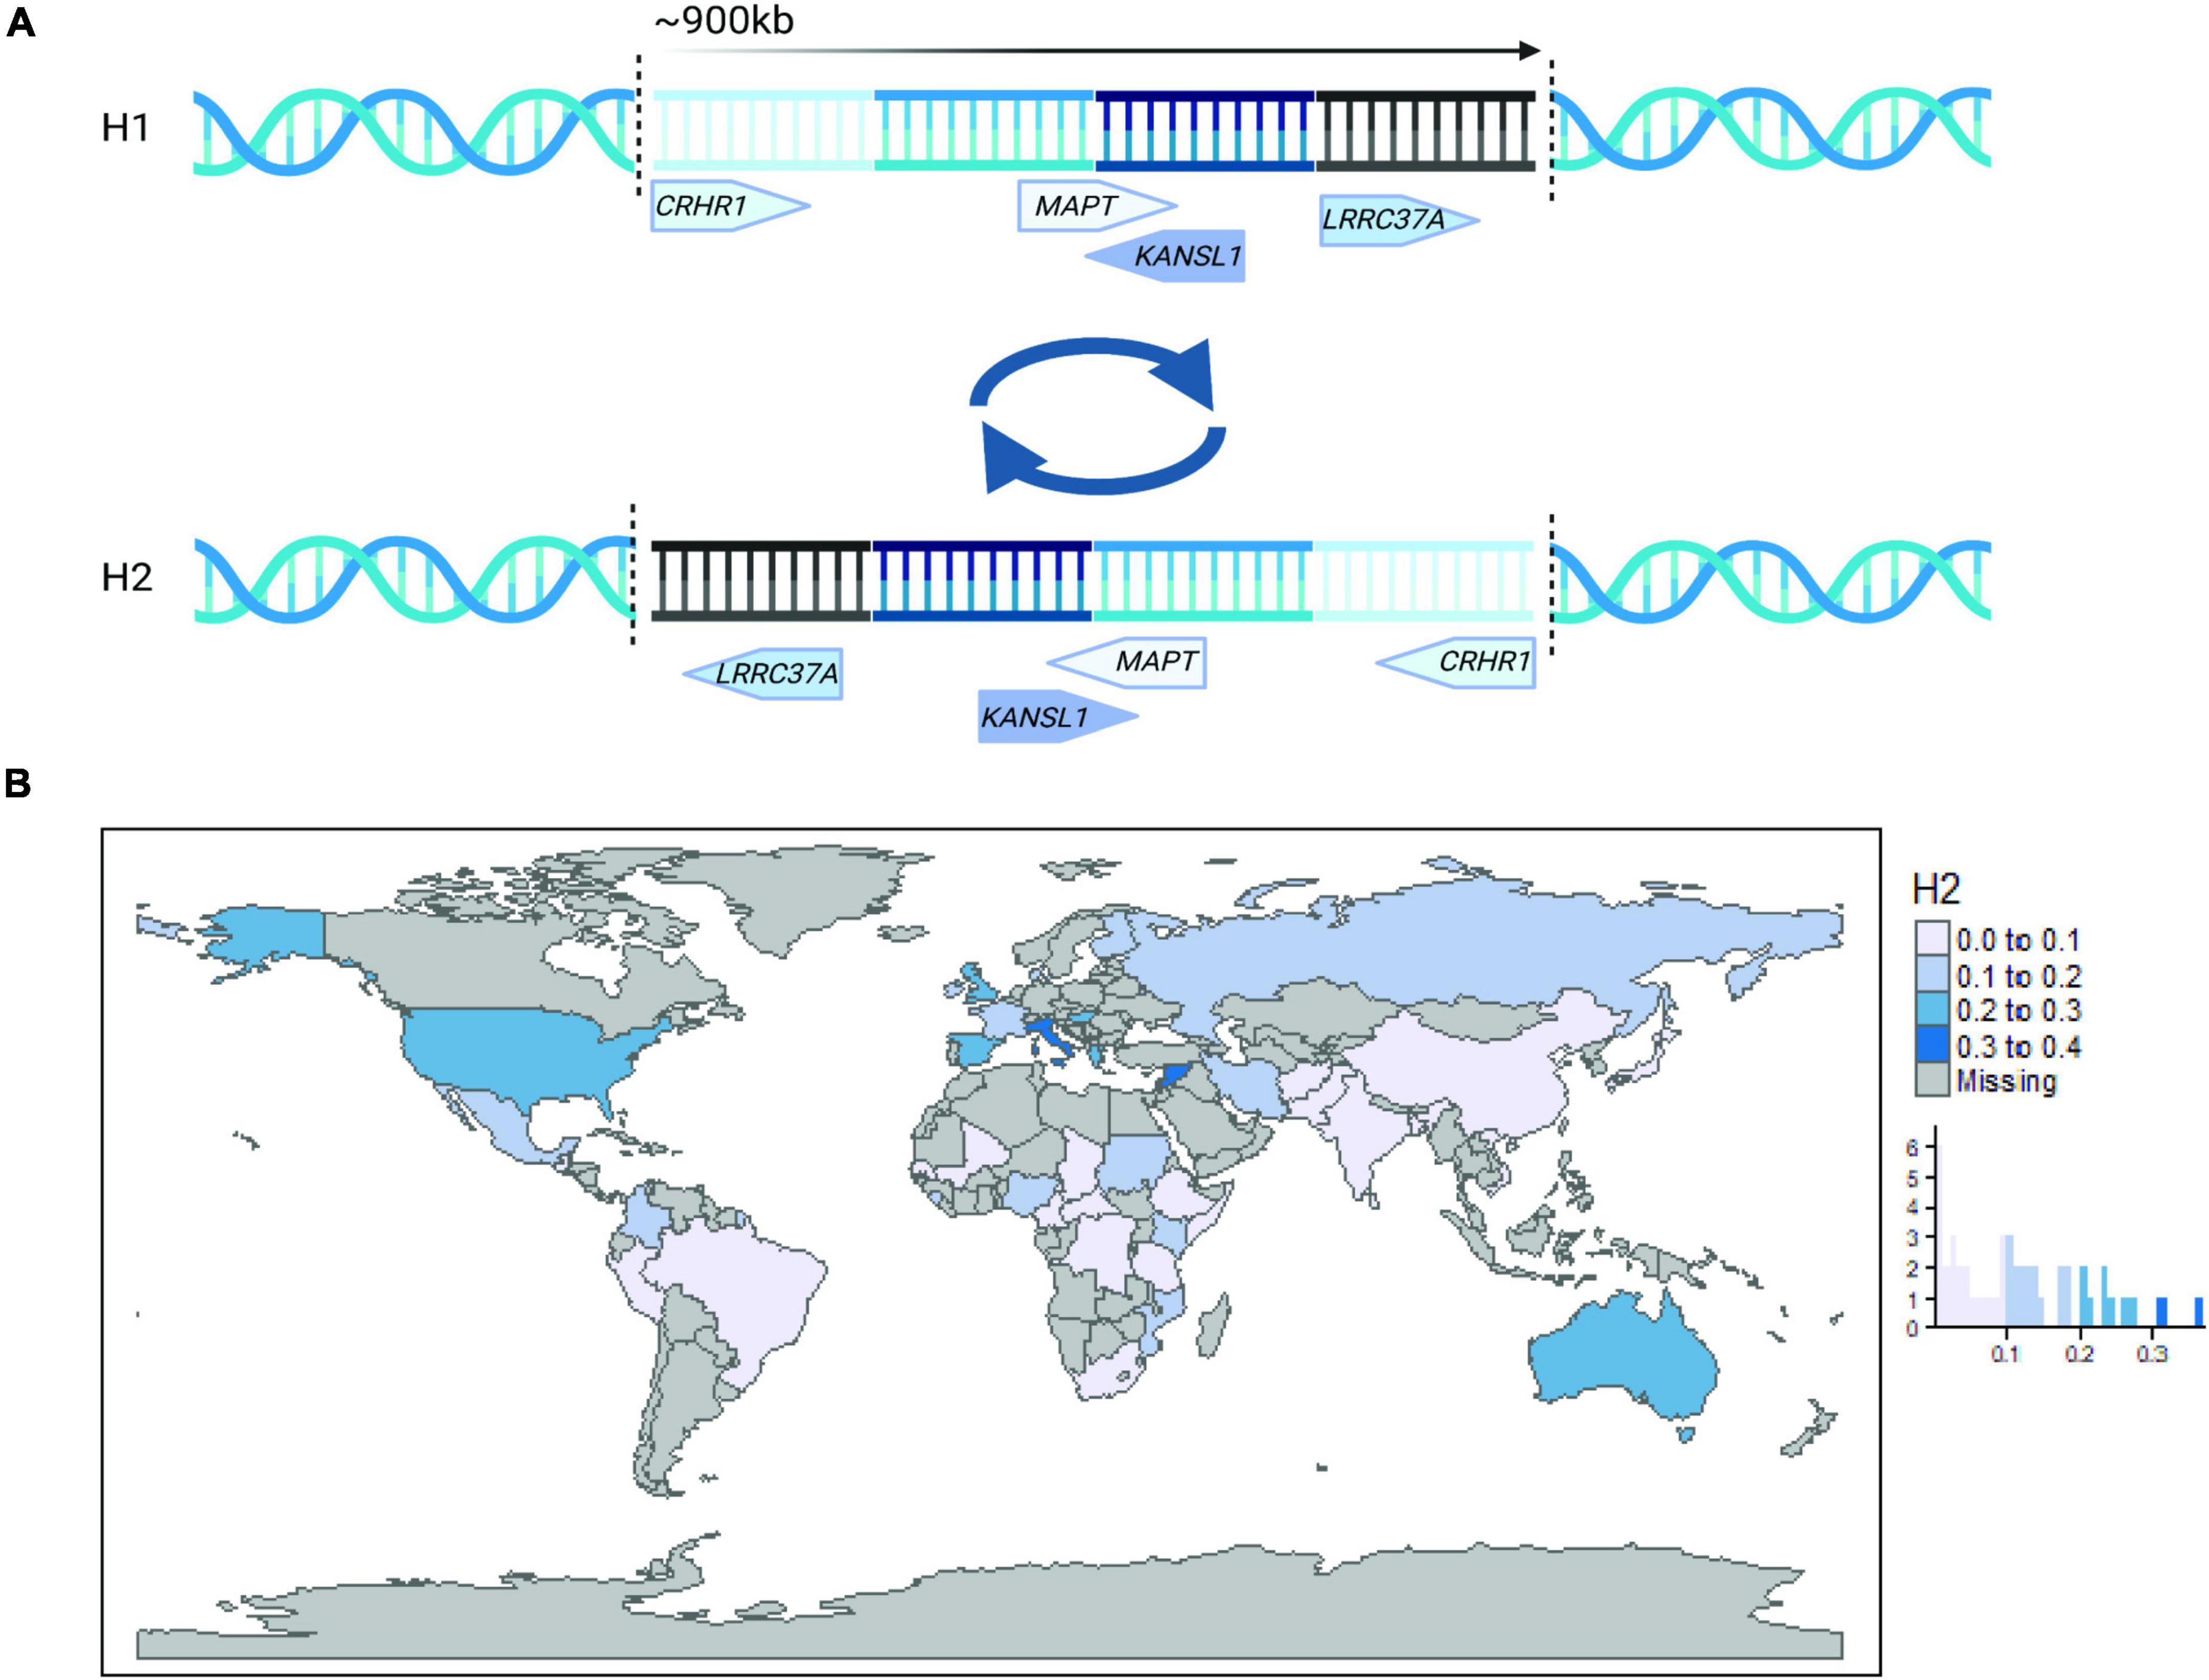 Frontiers | The influence of 17q21.31 and APOE genetic ancestry on